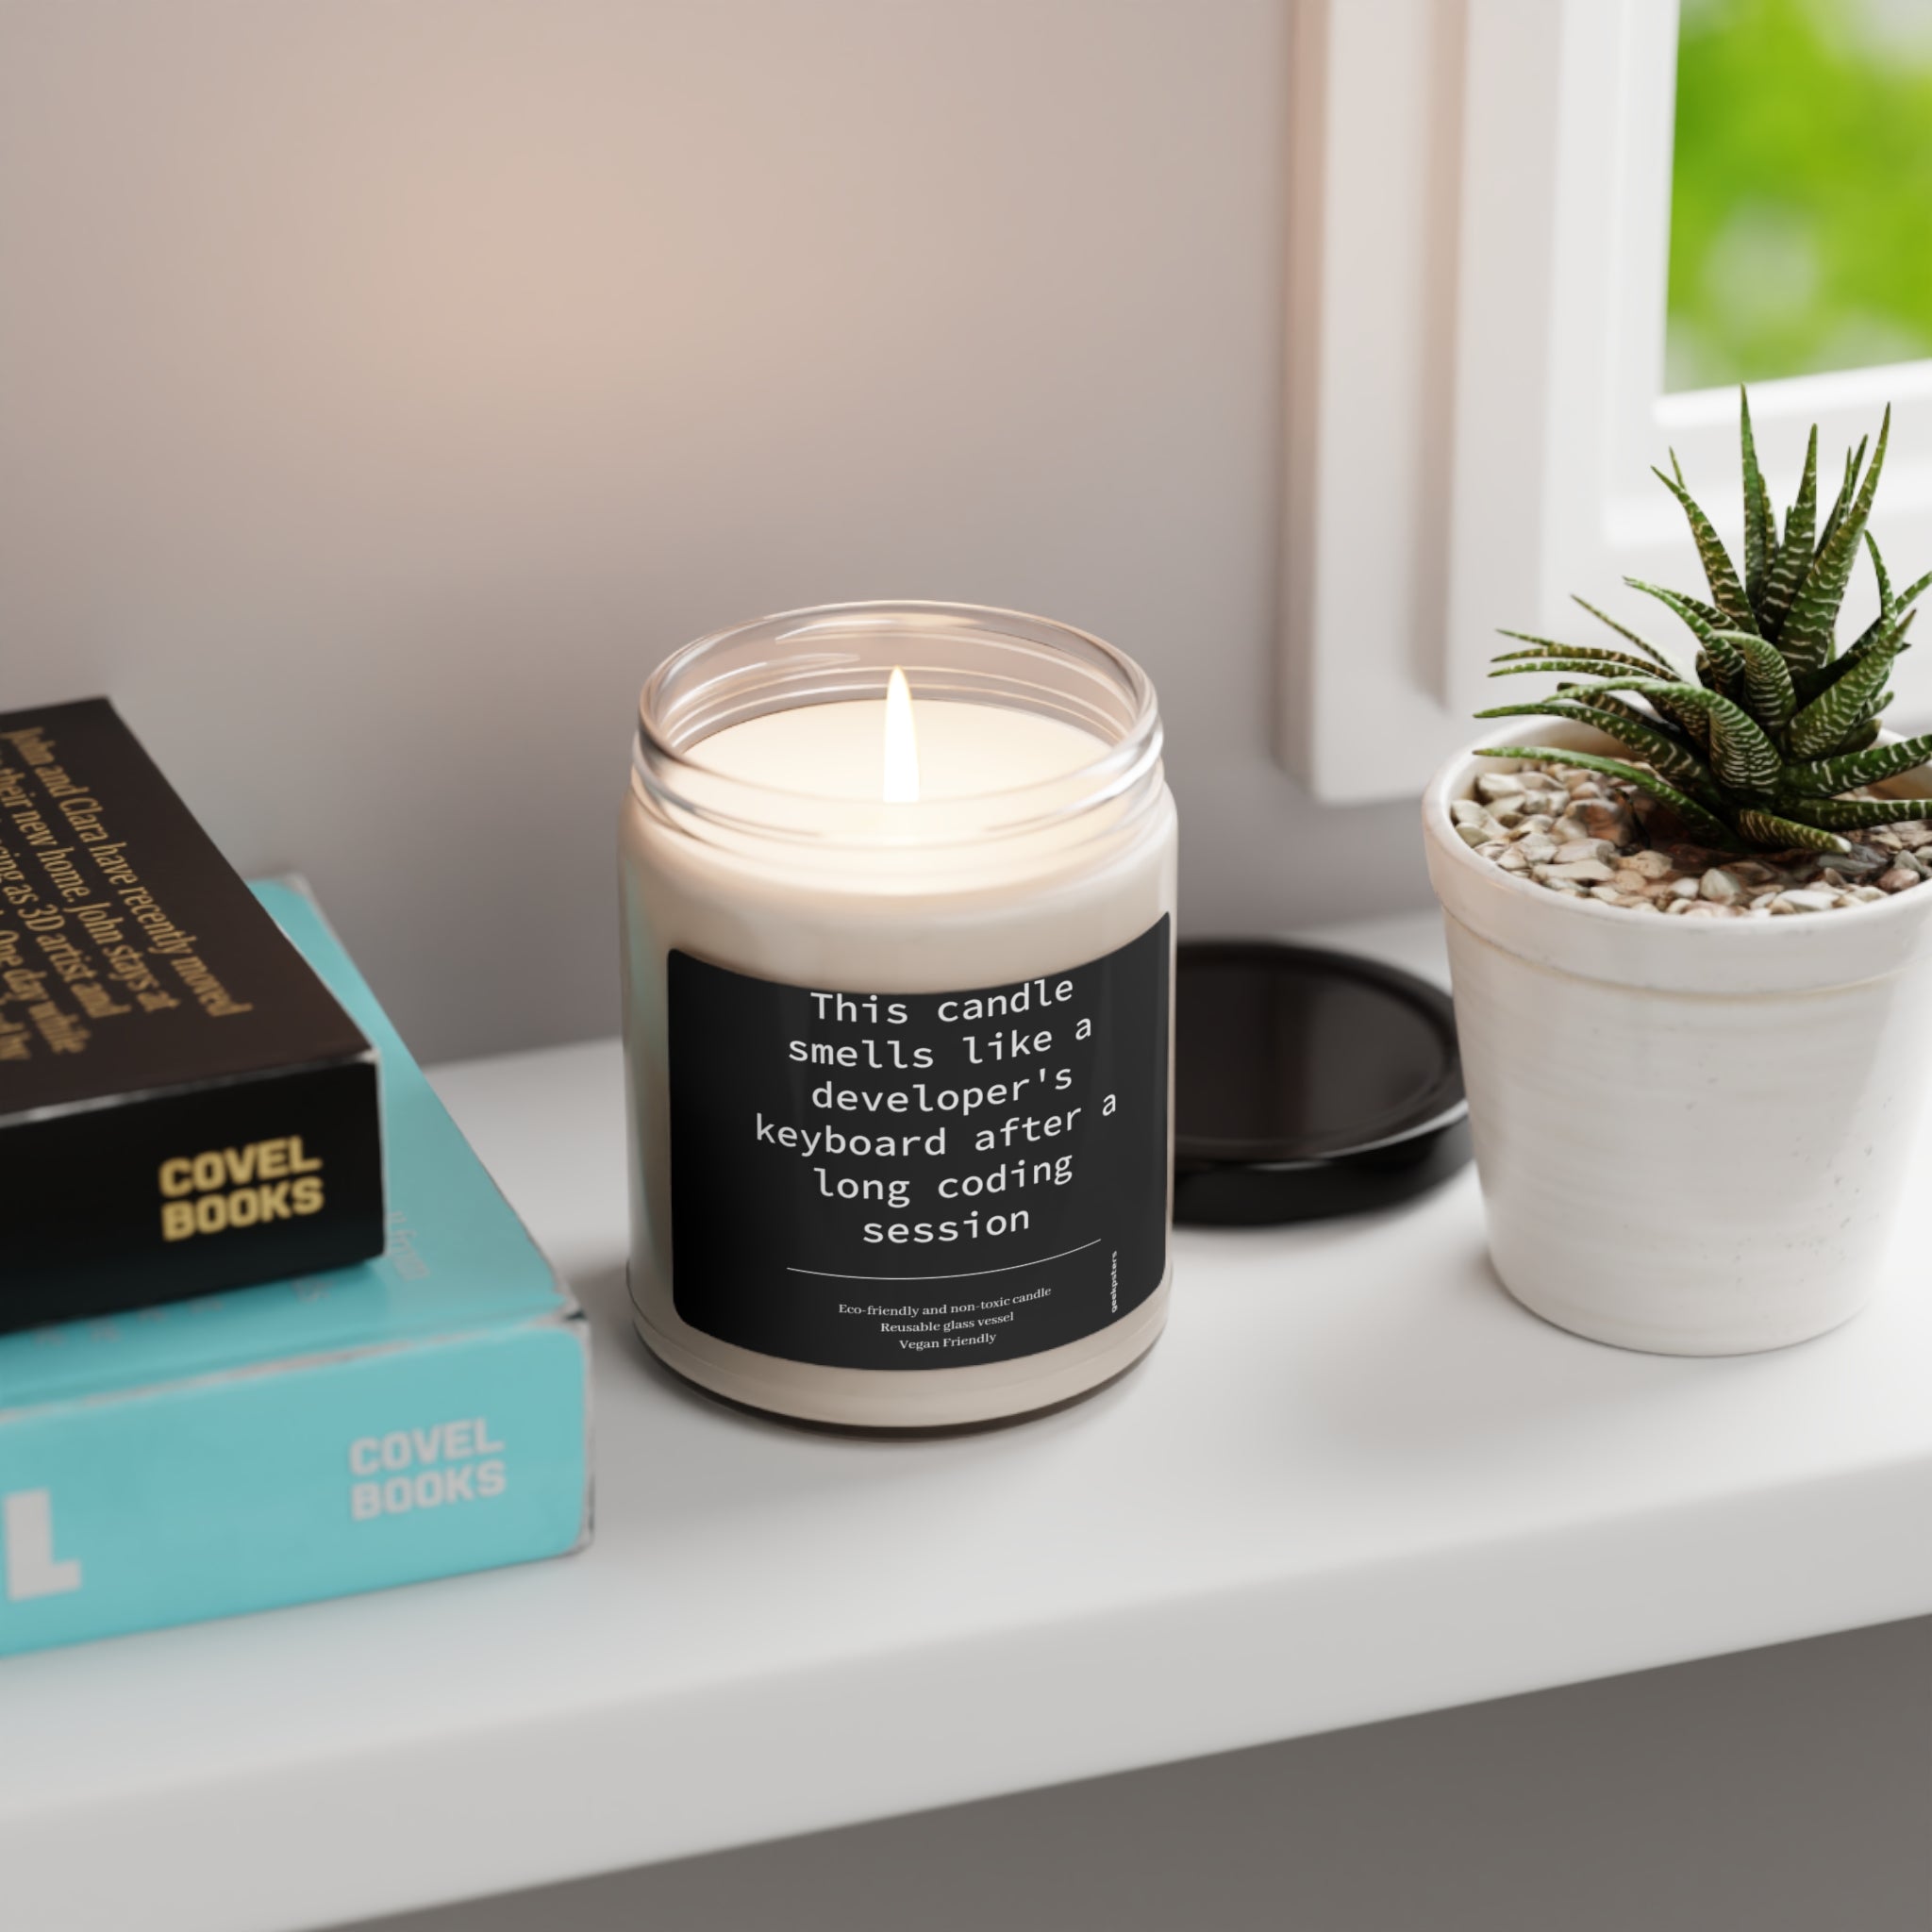 A lit scented soy candle with a cotton wick on a window sill next to a stack of books and a small potted plant.